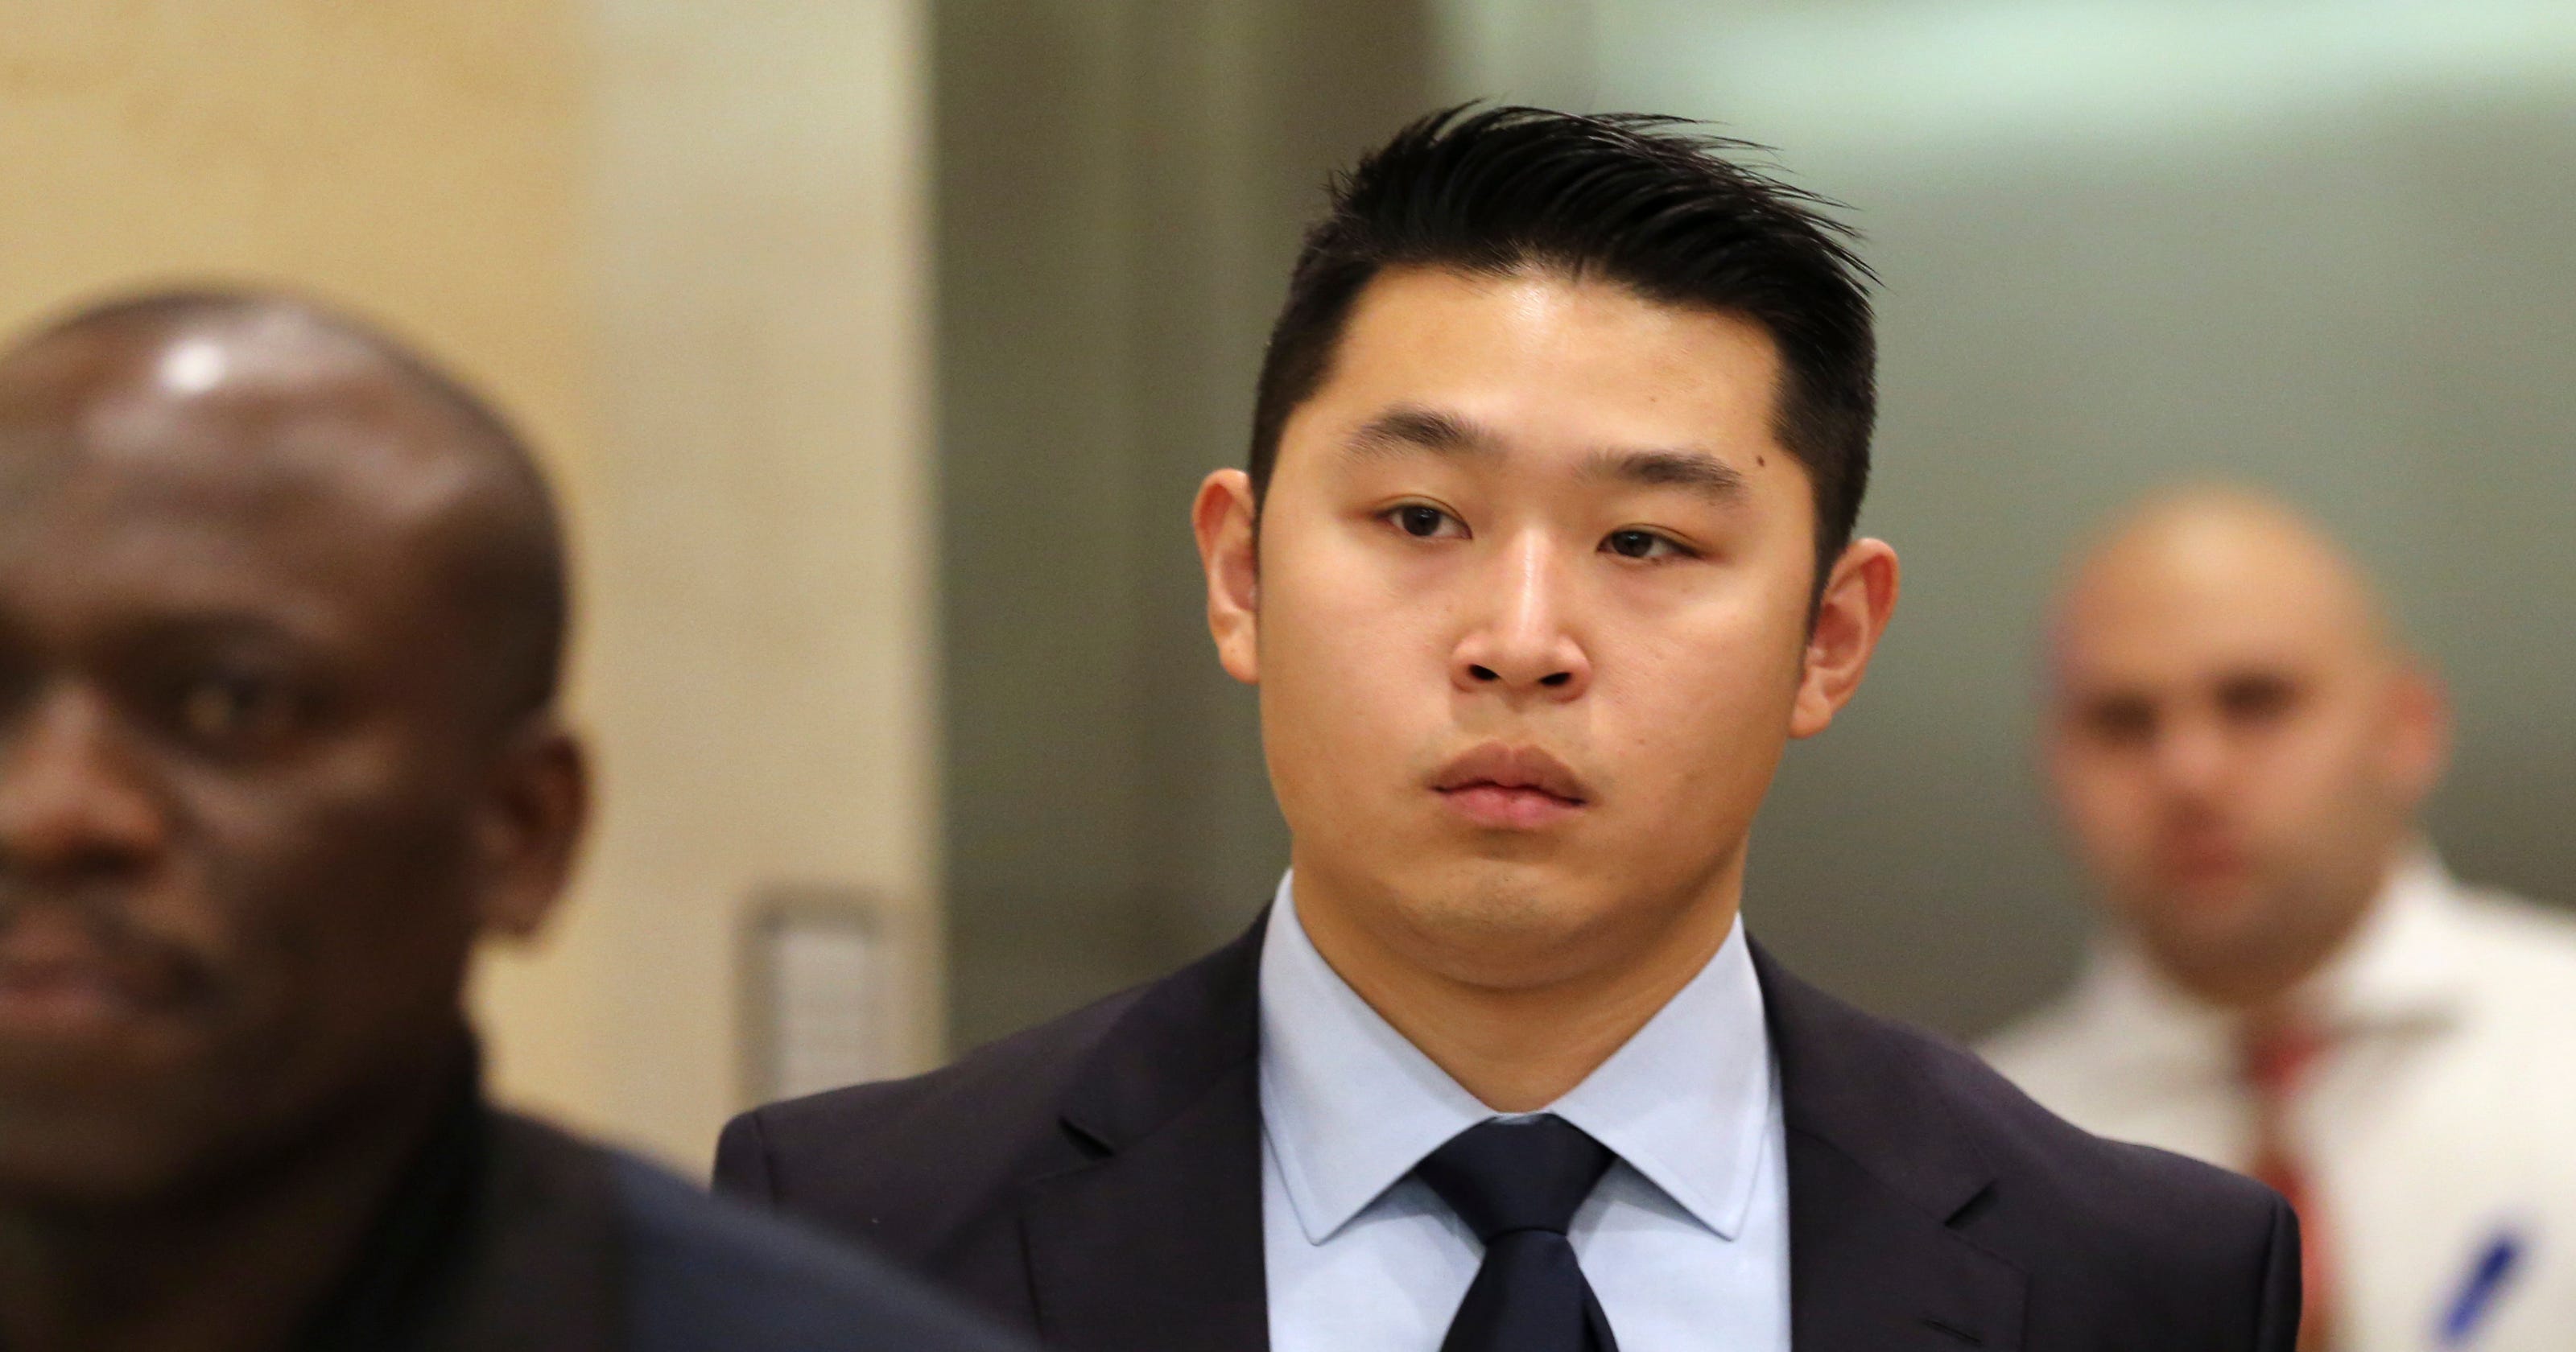 Da Wants House Arrest For Nyc Cop Convicted In Death Of Unarmed Black Man 